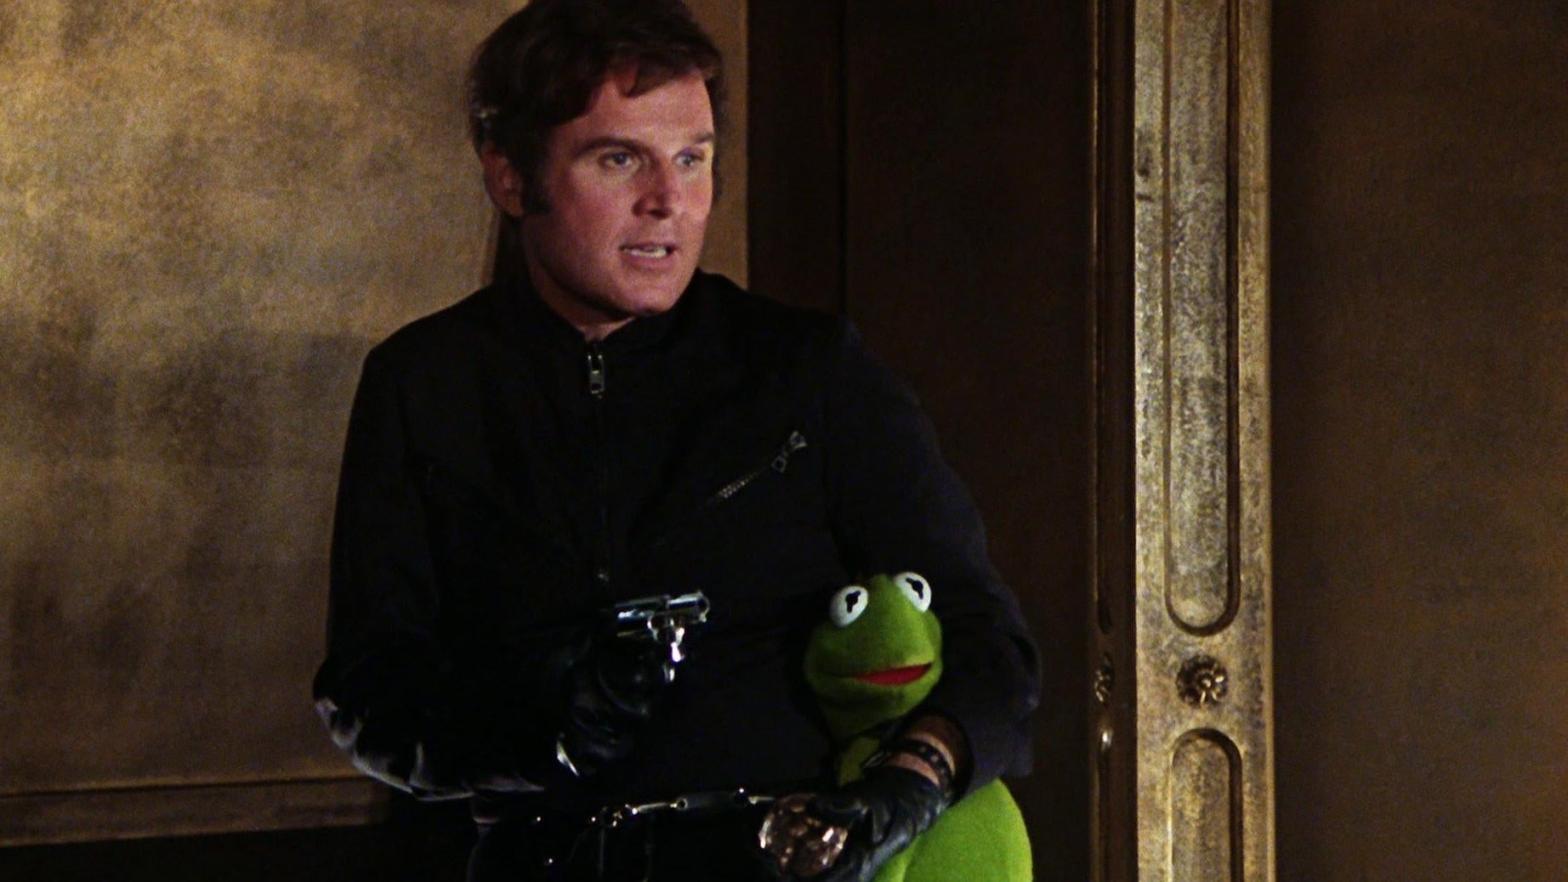 Kermit the Frog and the late, great, Charles Grodin. (Photo: Universal)